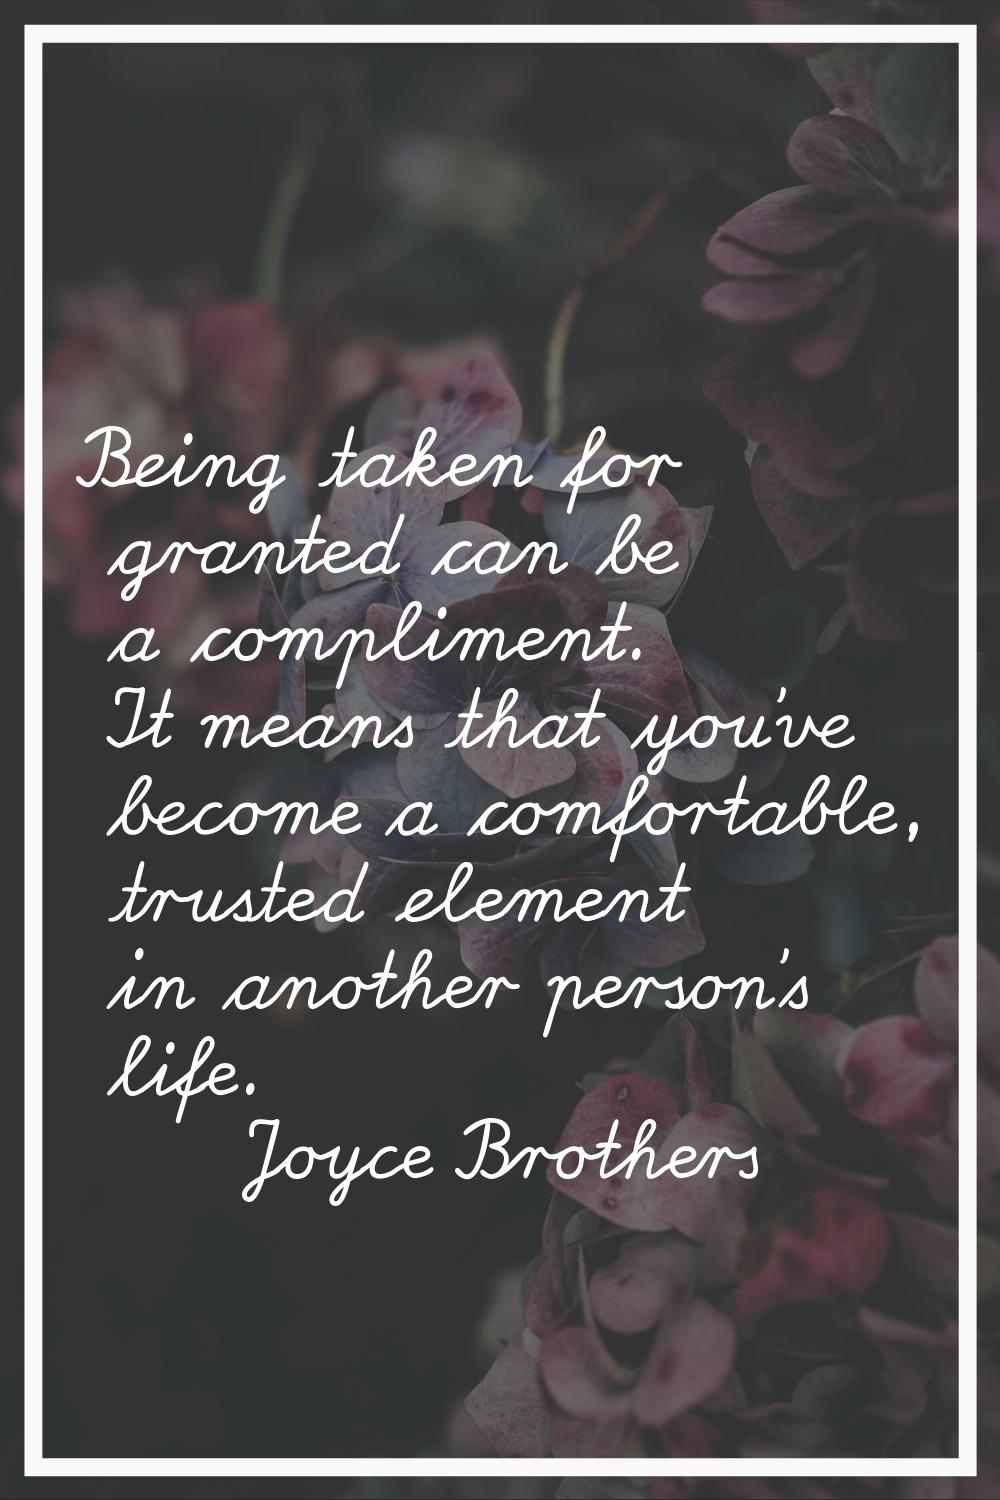 Being taken for granted can be a compliment. It means that you've become a comfortable, trusted ele